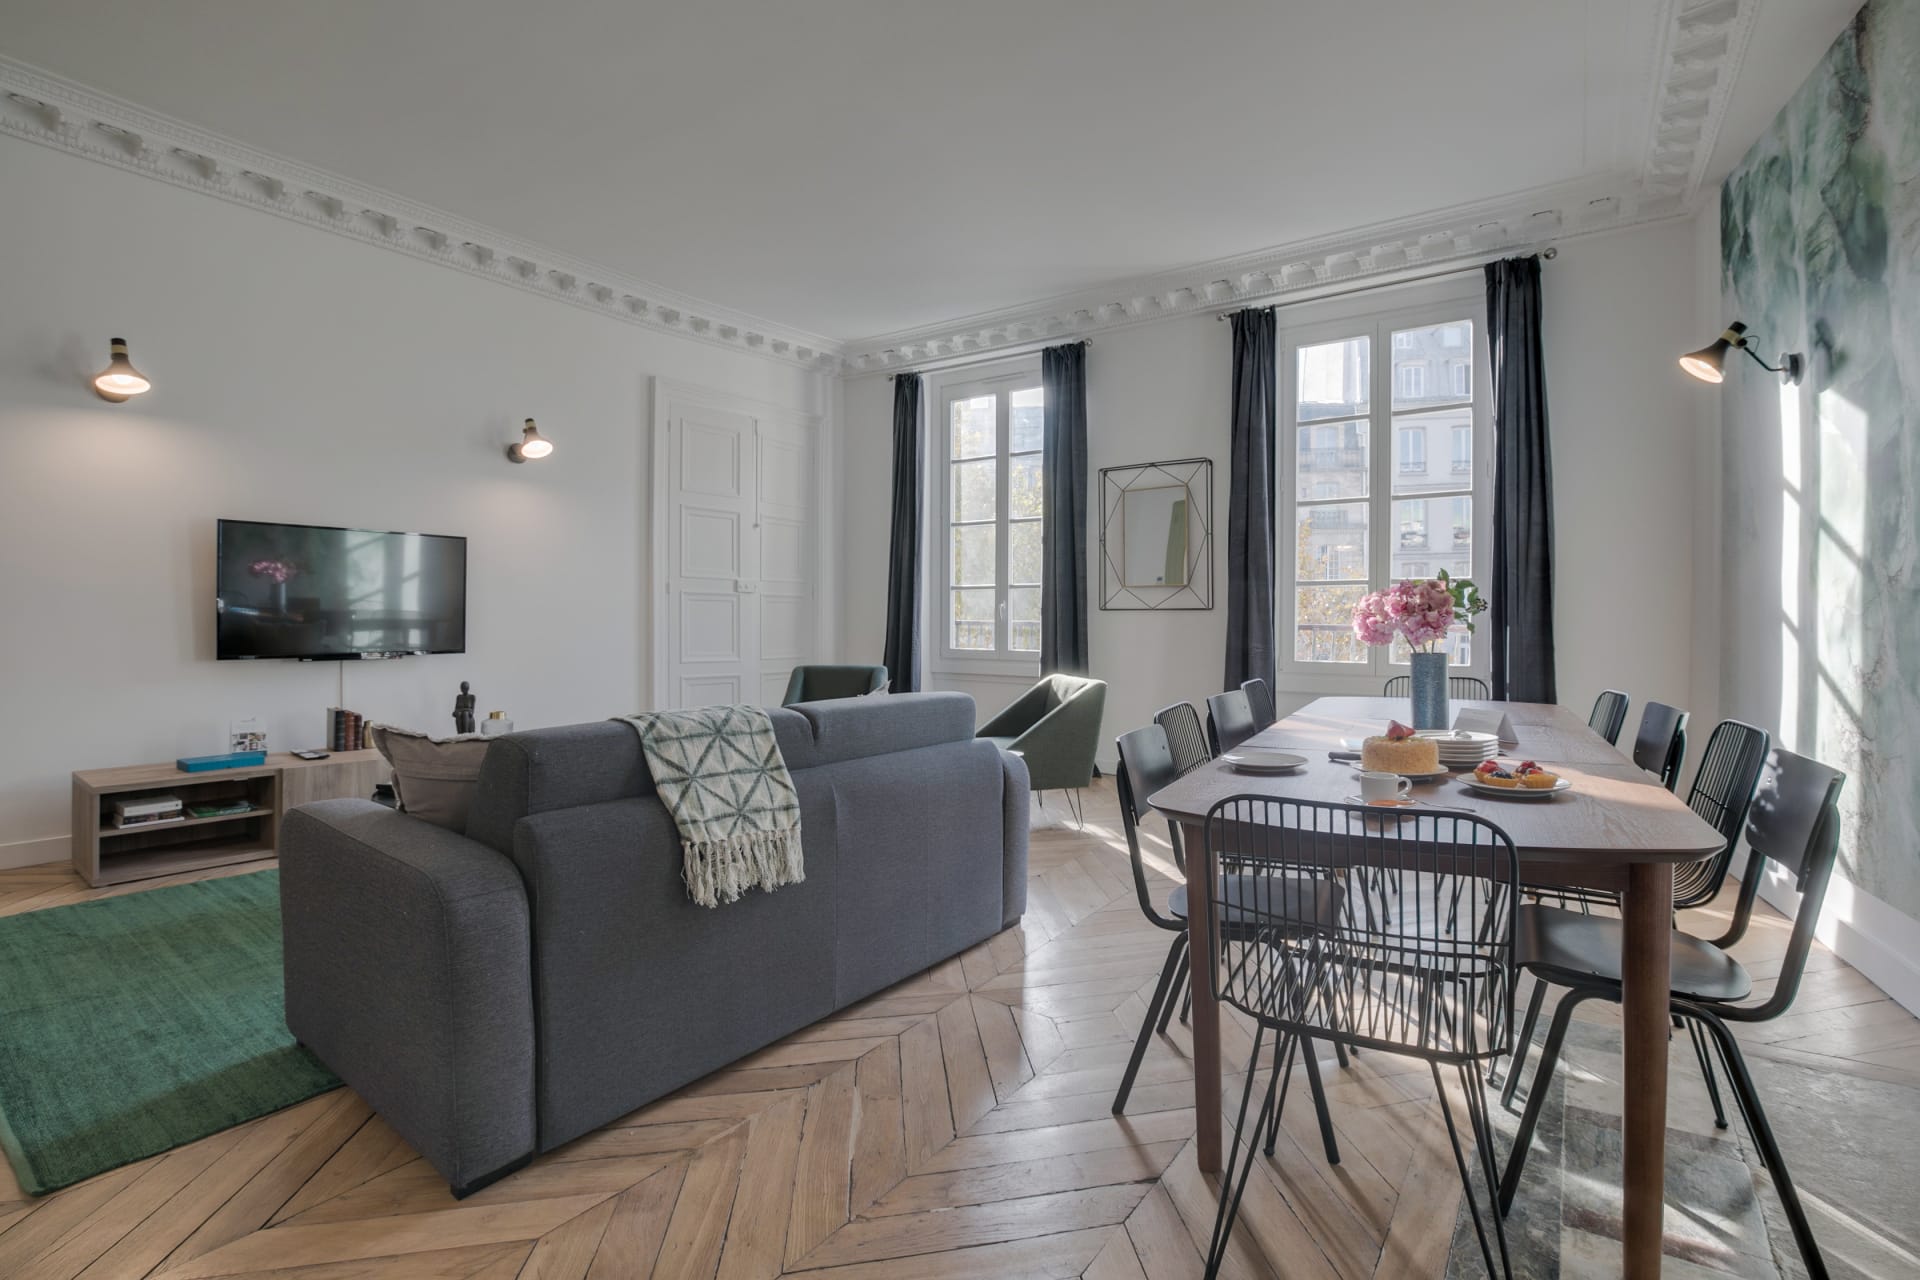 Property Image 1 - Spectacular three bedroom apartment near the Arc de Triomphe